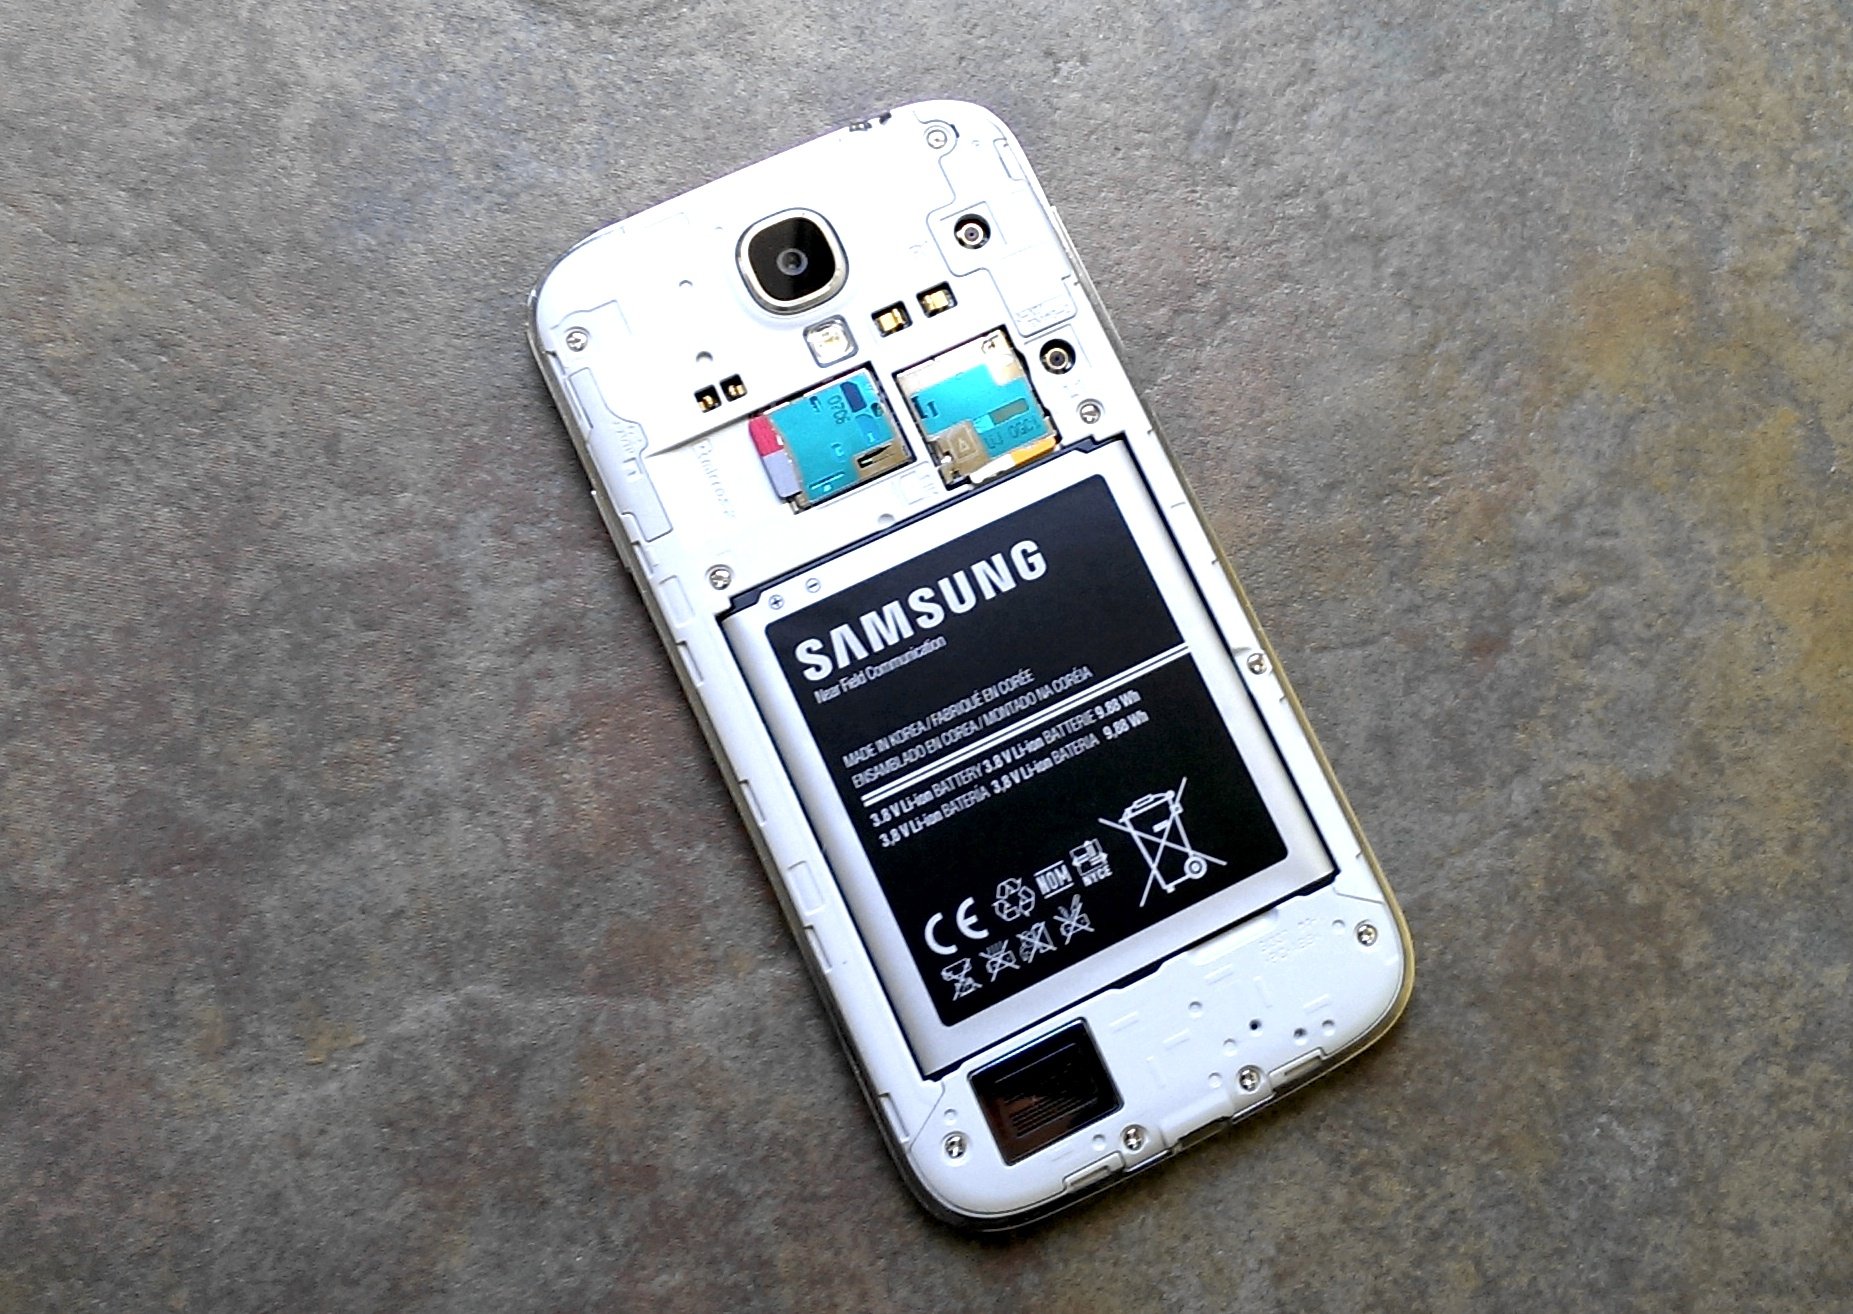 The Samsung Galaxy S4 Android 4.4 Update changes what apps can do with the Micro SD card.